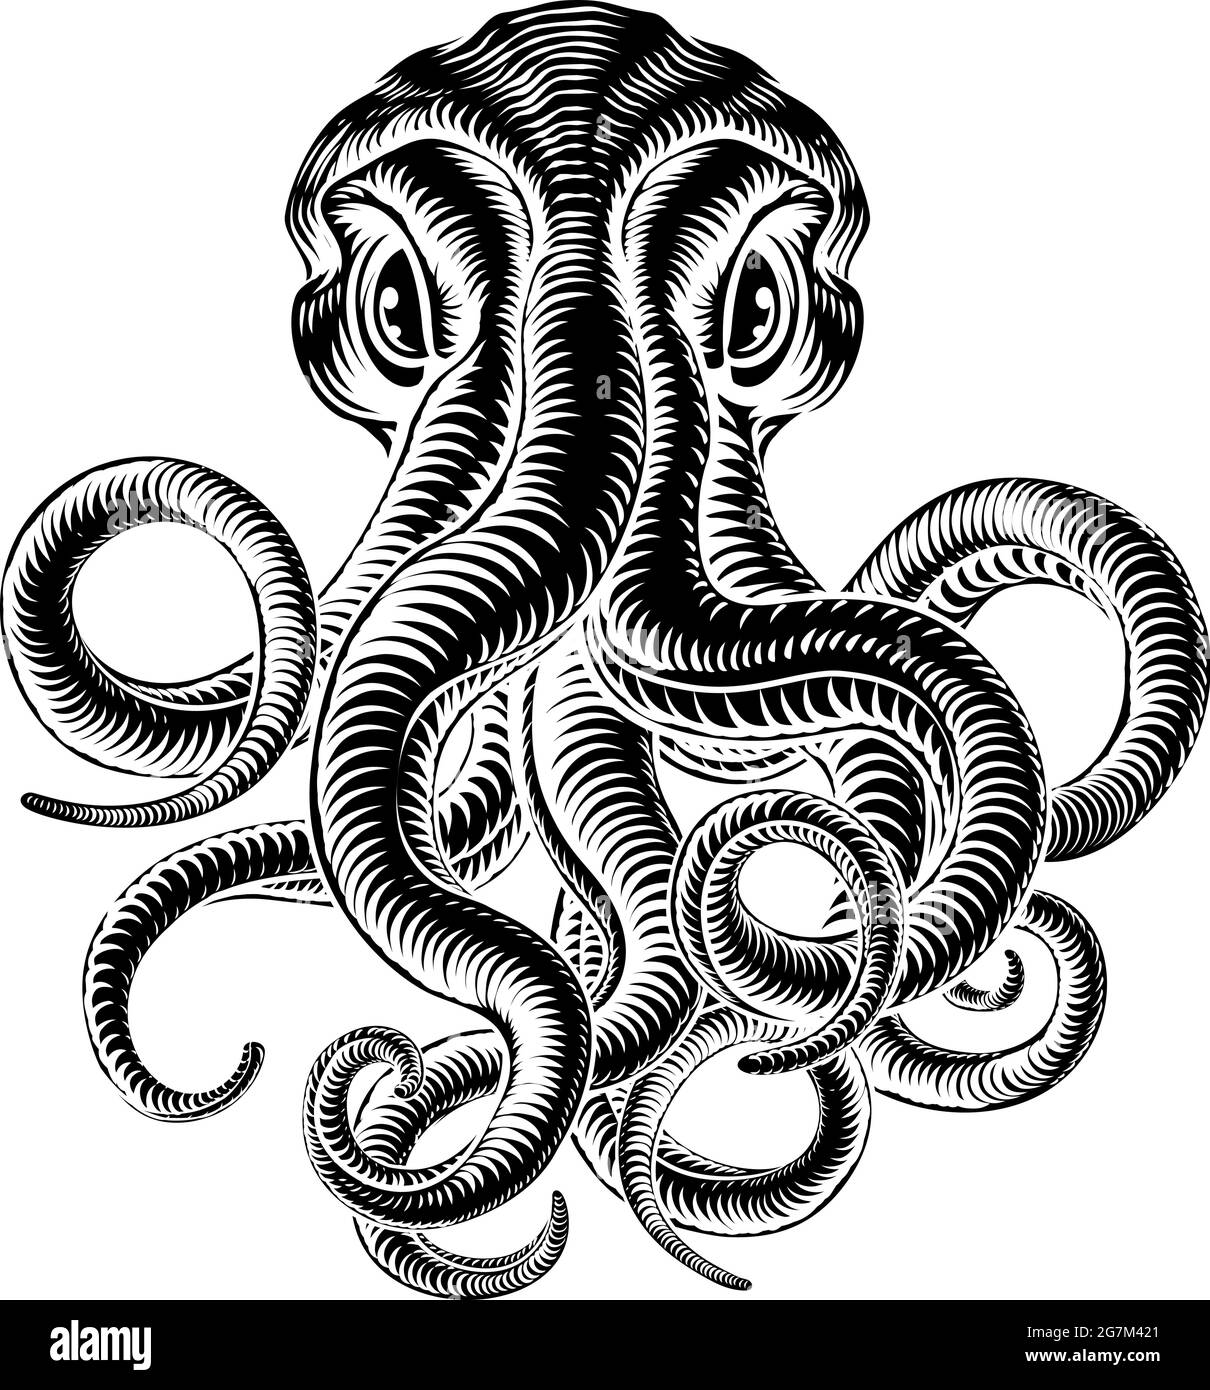 Octopus or Cthulhu Squid Monster Vintage Woodcut Stock Vector